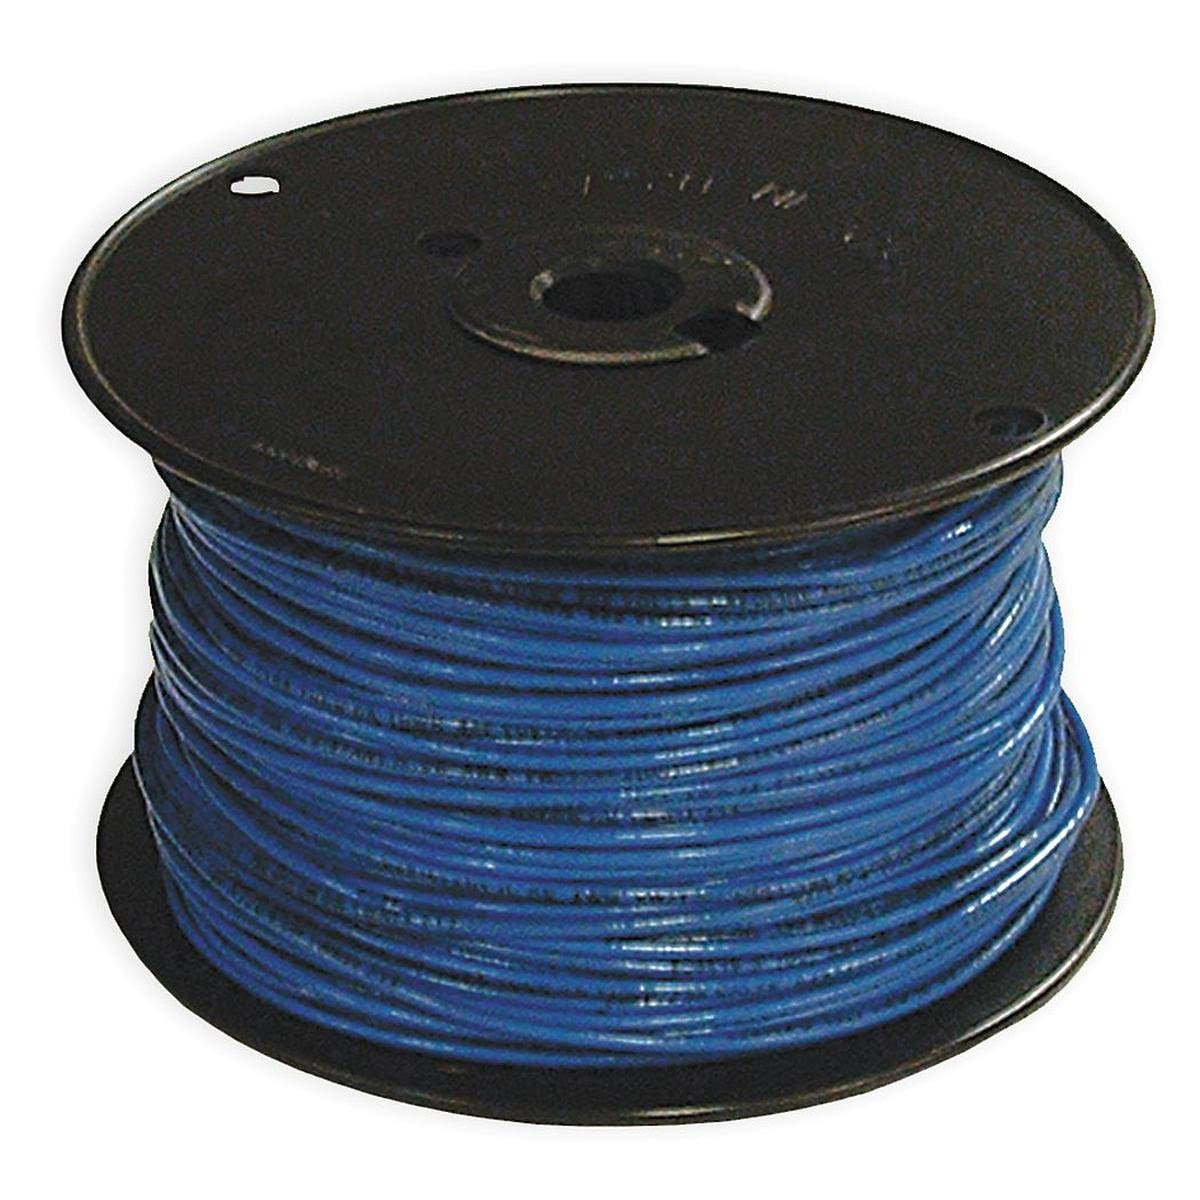 Southwire Company Stranded Single Building Wire - Gauge 14 AWG, THHN, 500m